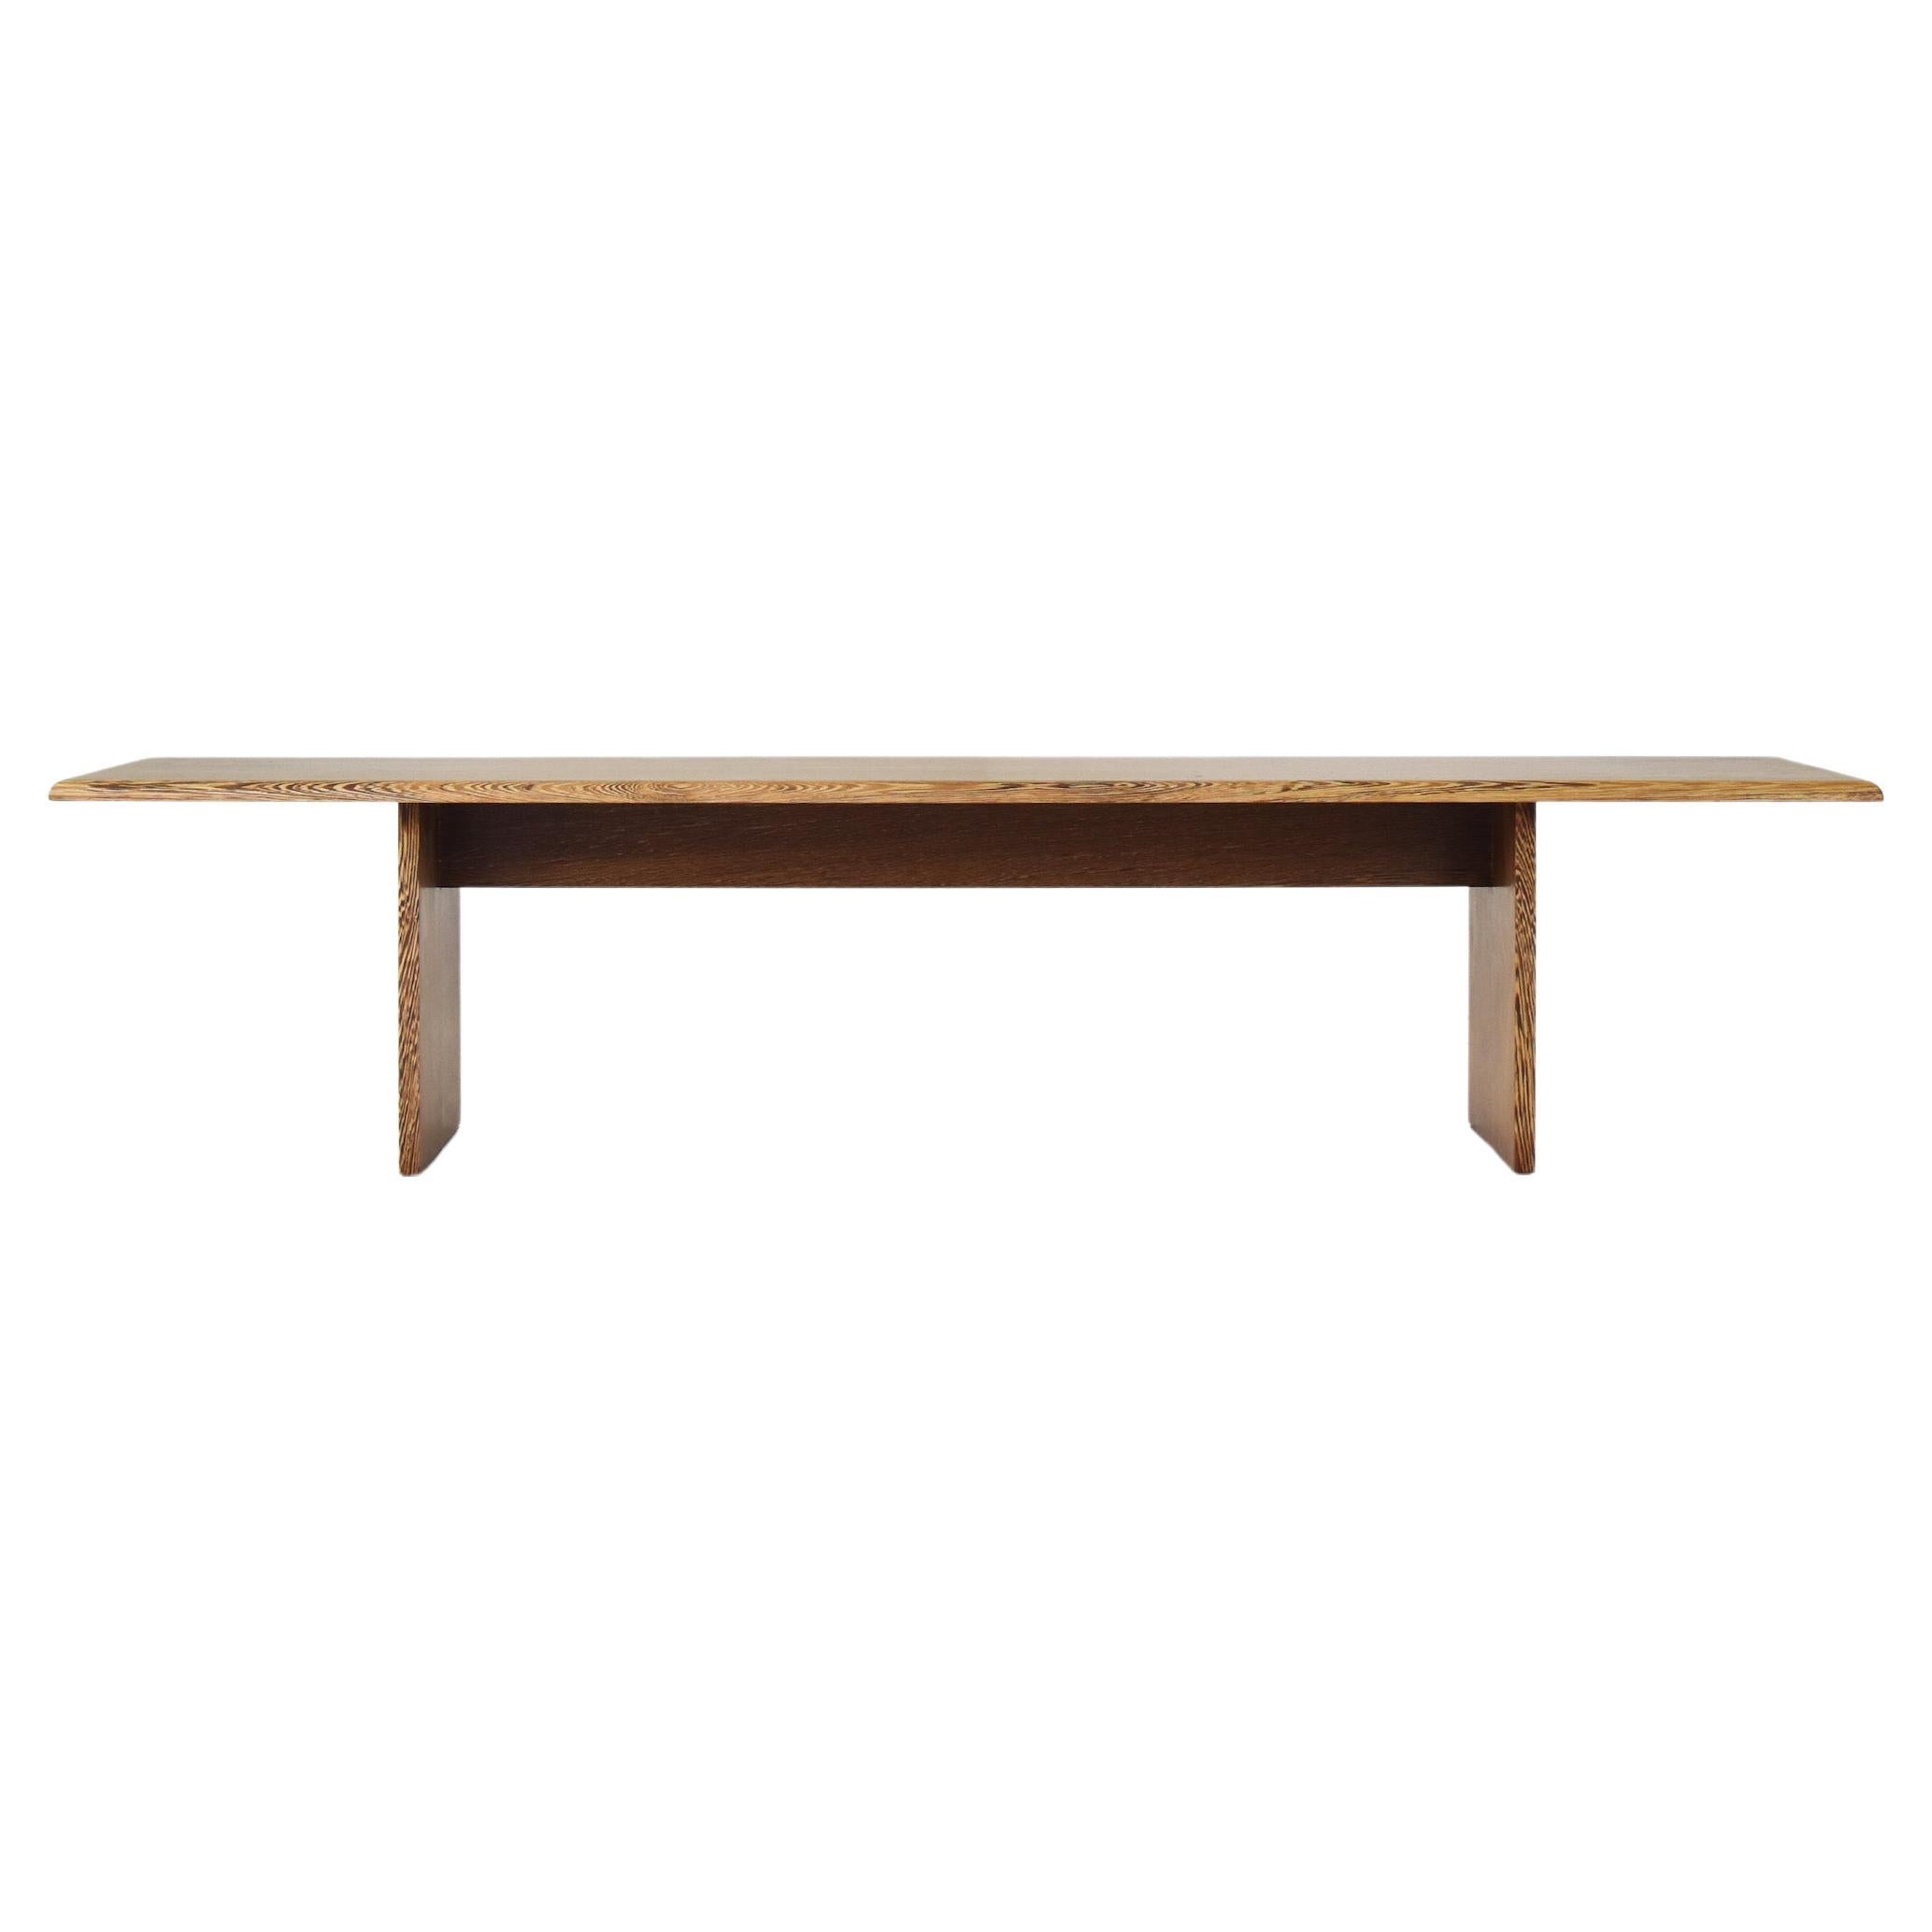 Low Coffee Table from Belgium, Designed and Manufactured in the 1960’s